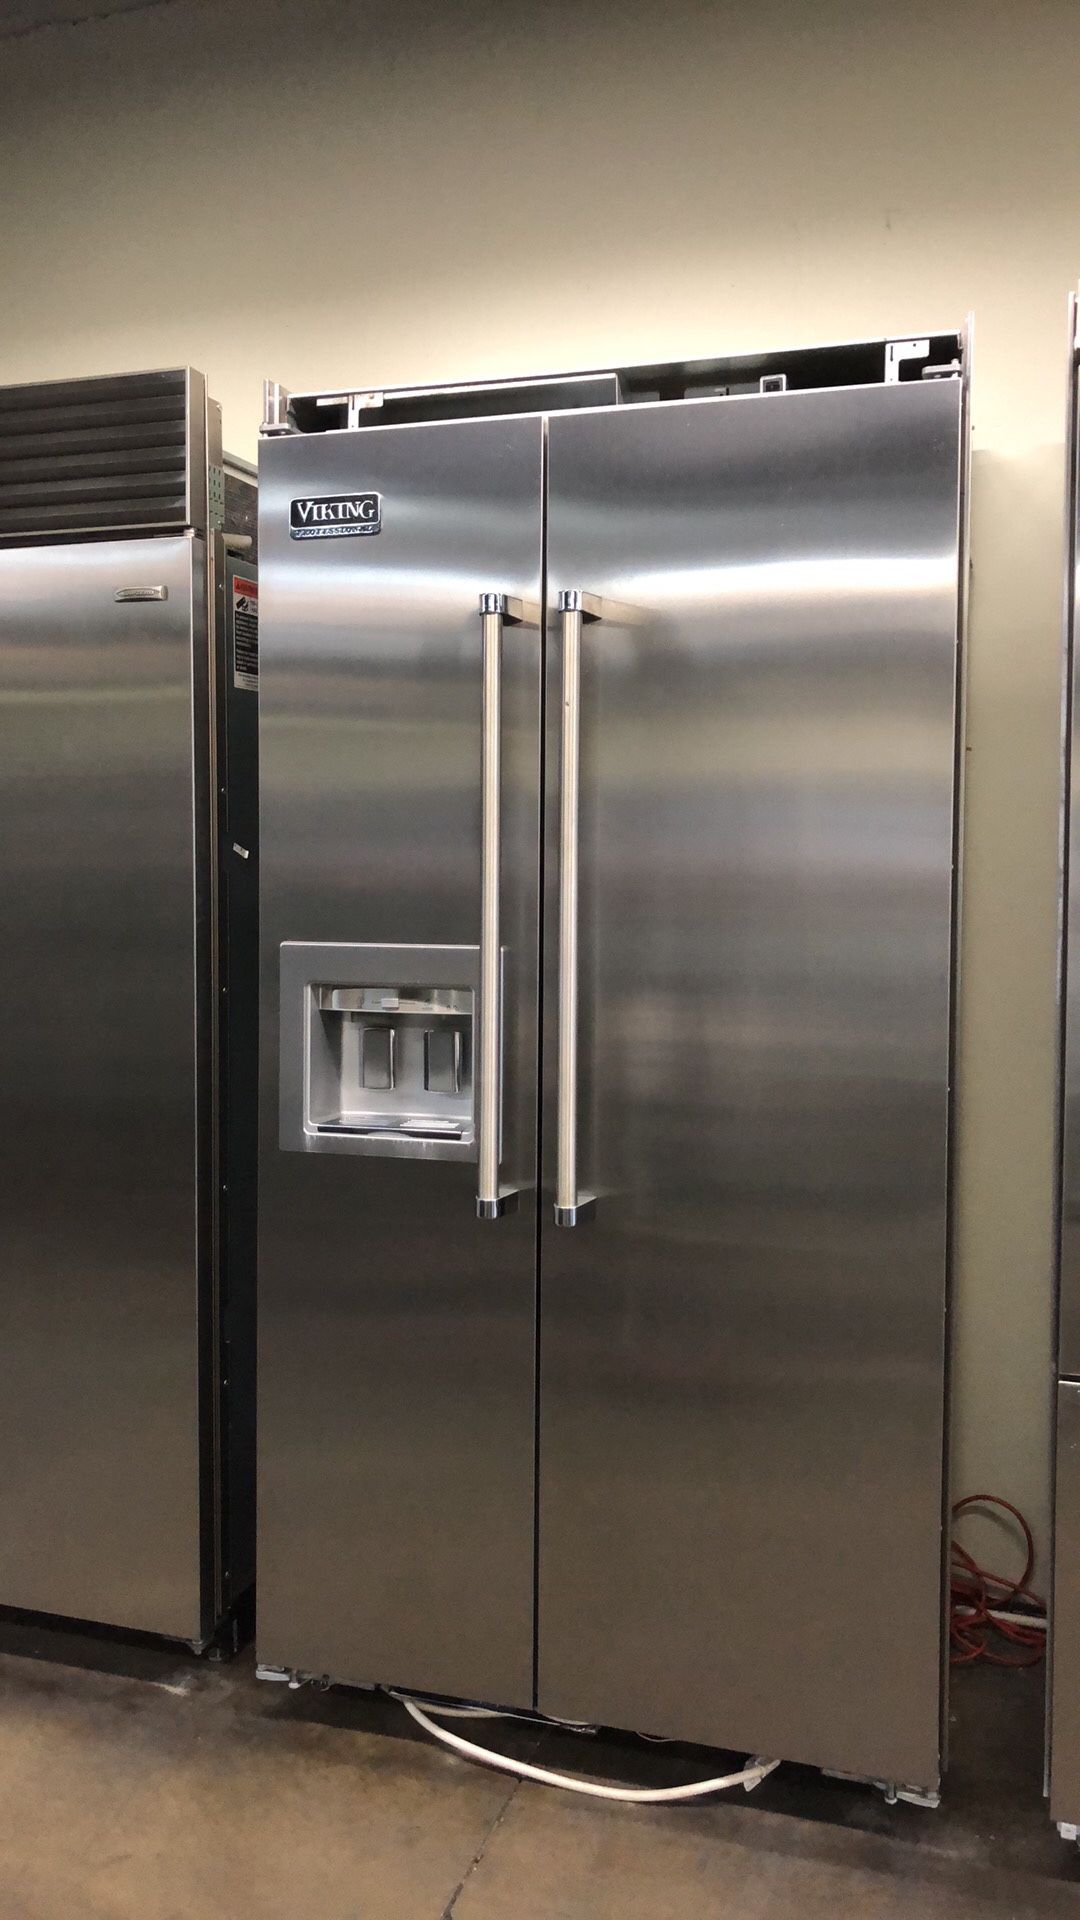 Whirlpool 42” Stainless Steel Side By Side Built In Refrigerator 